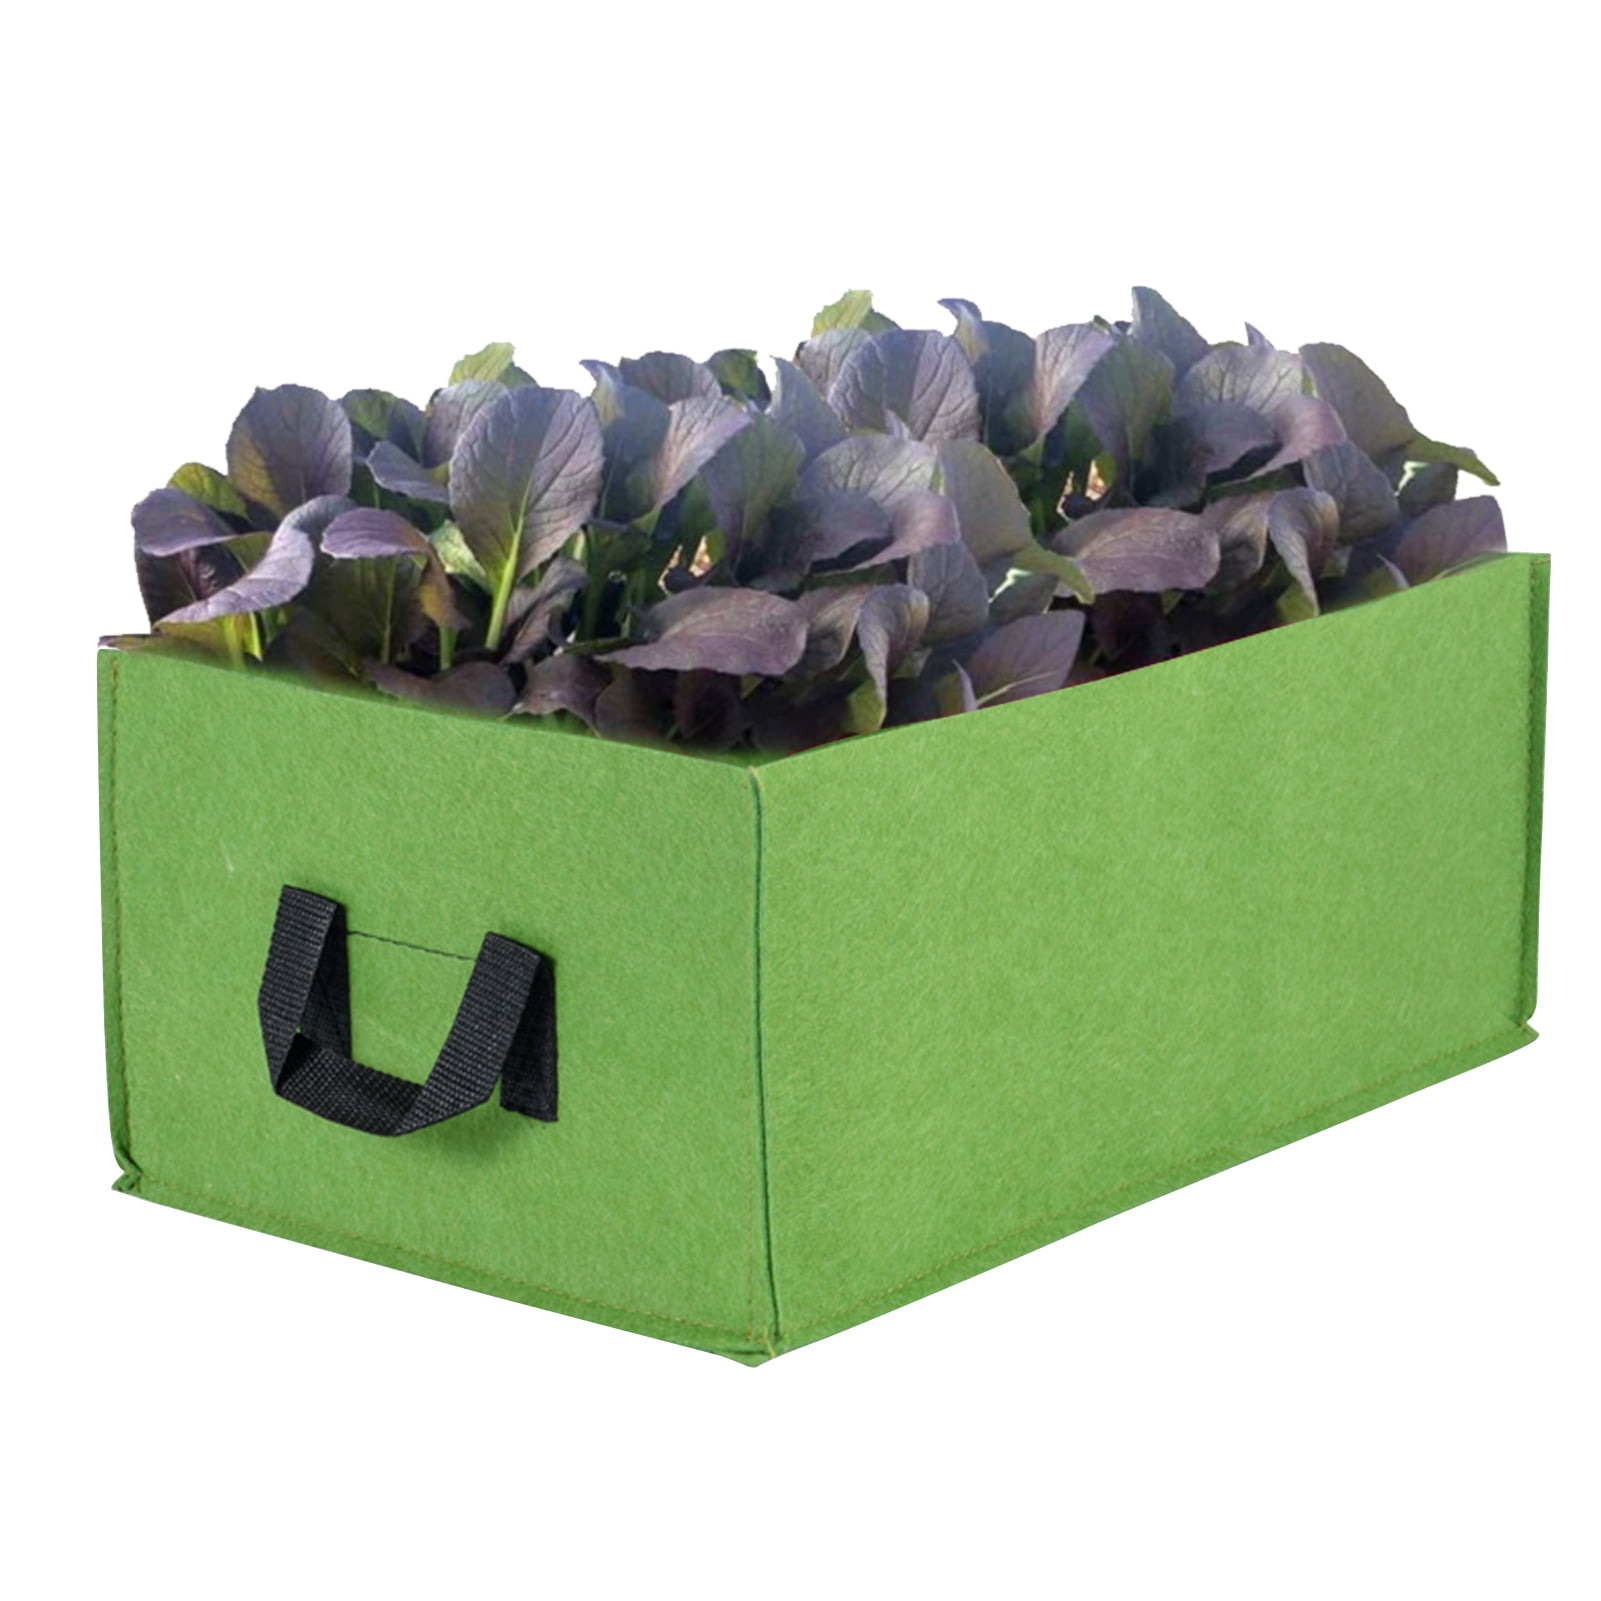 Details about   Raised Fabric Bed Elevated Vegetable Box Garden Planting Planter Flower Grow Bag 